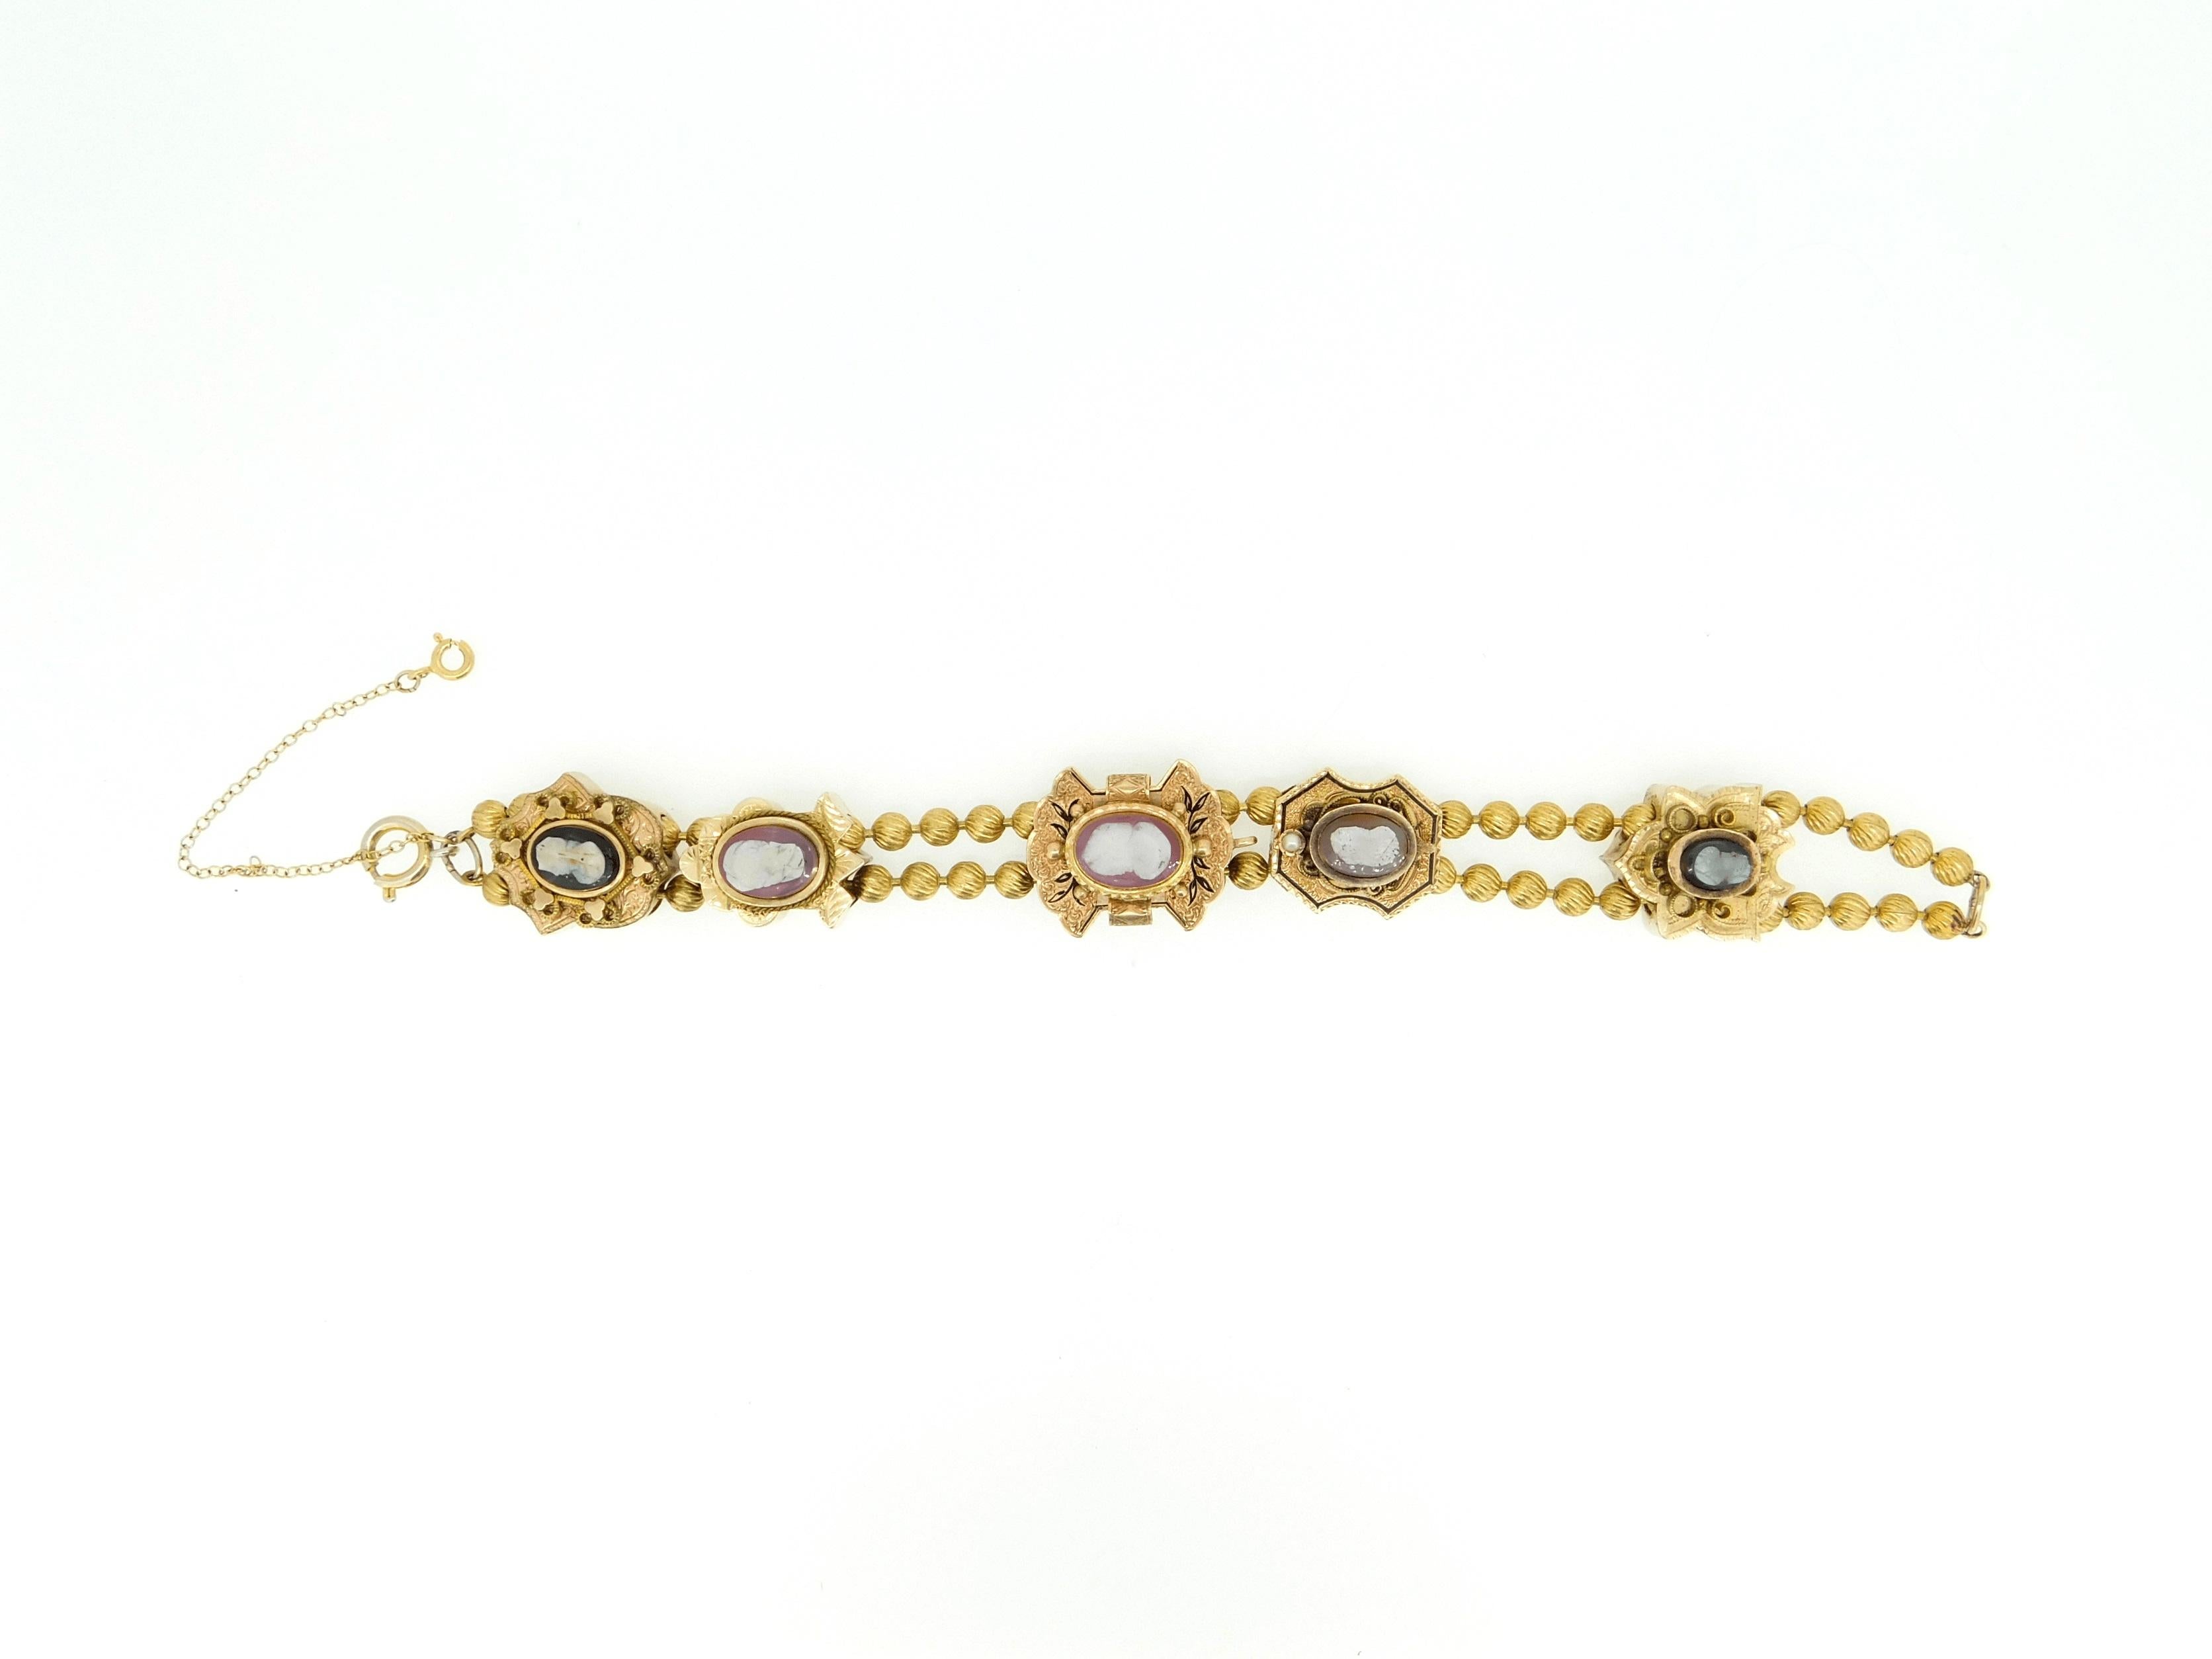 Genuine Natural Stone Cameo Victorian XL Gold Slide Bracelet (#J4362)

Victorian cameo bracelet made with yellow and rose gold extra large slides. It features three brown and white stone cameo 14k gold slides, and two gold filled slides with black